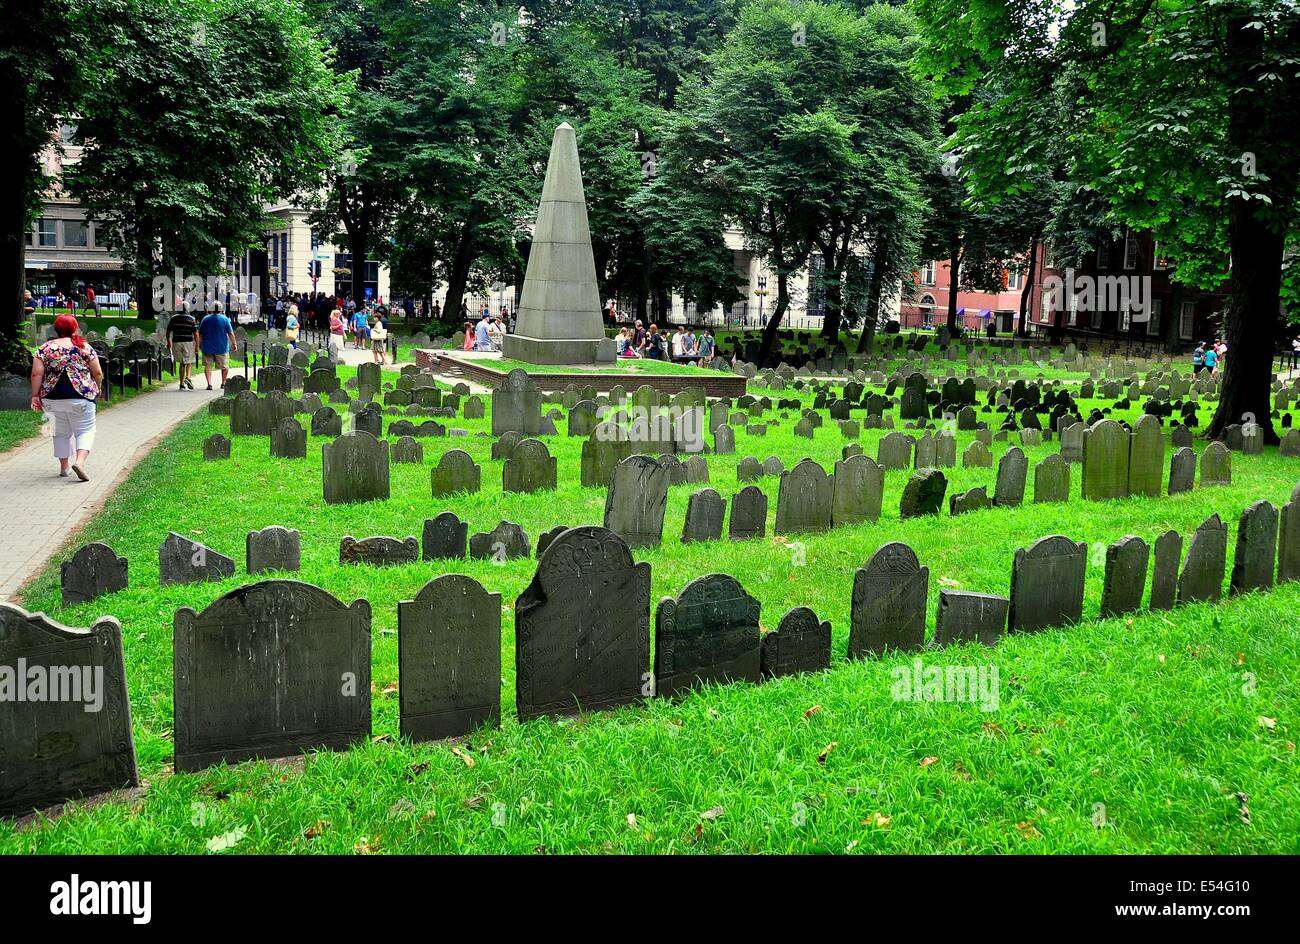 BOSTON, MASSACHUSETTS:  Row upon row of 18th century tombstones in the historic Grannary Burial Ground on Tremont Street * Stock Photo